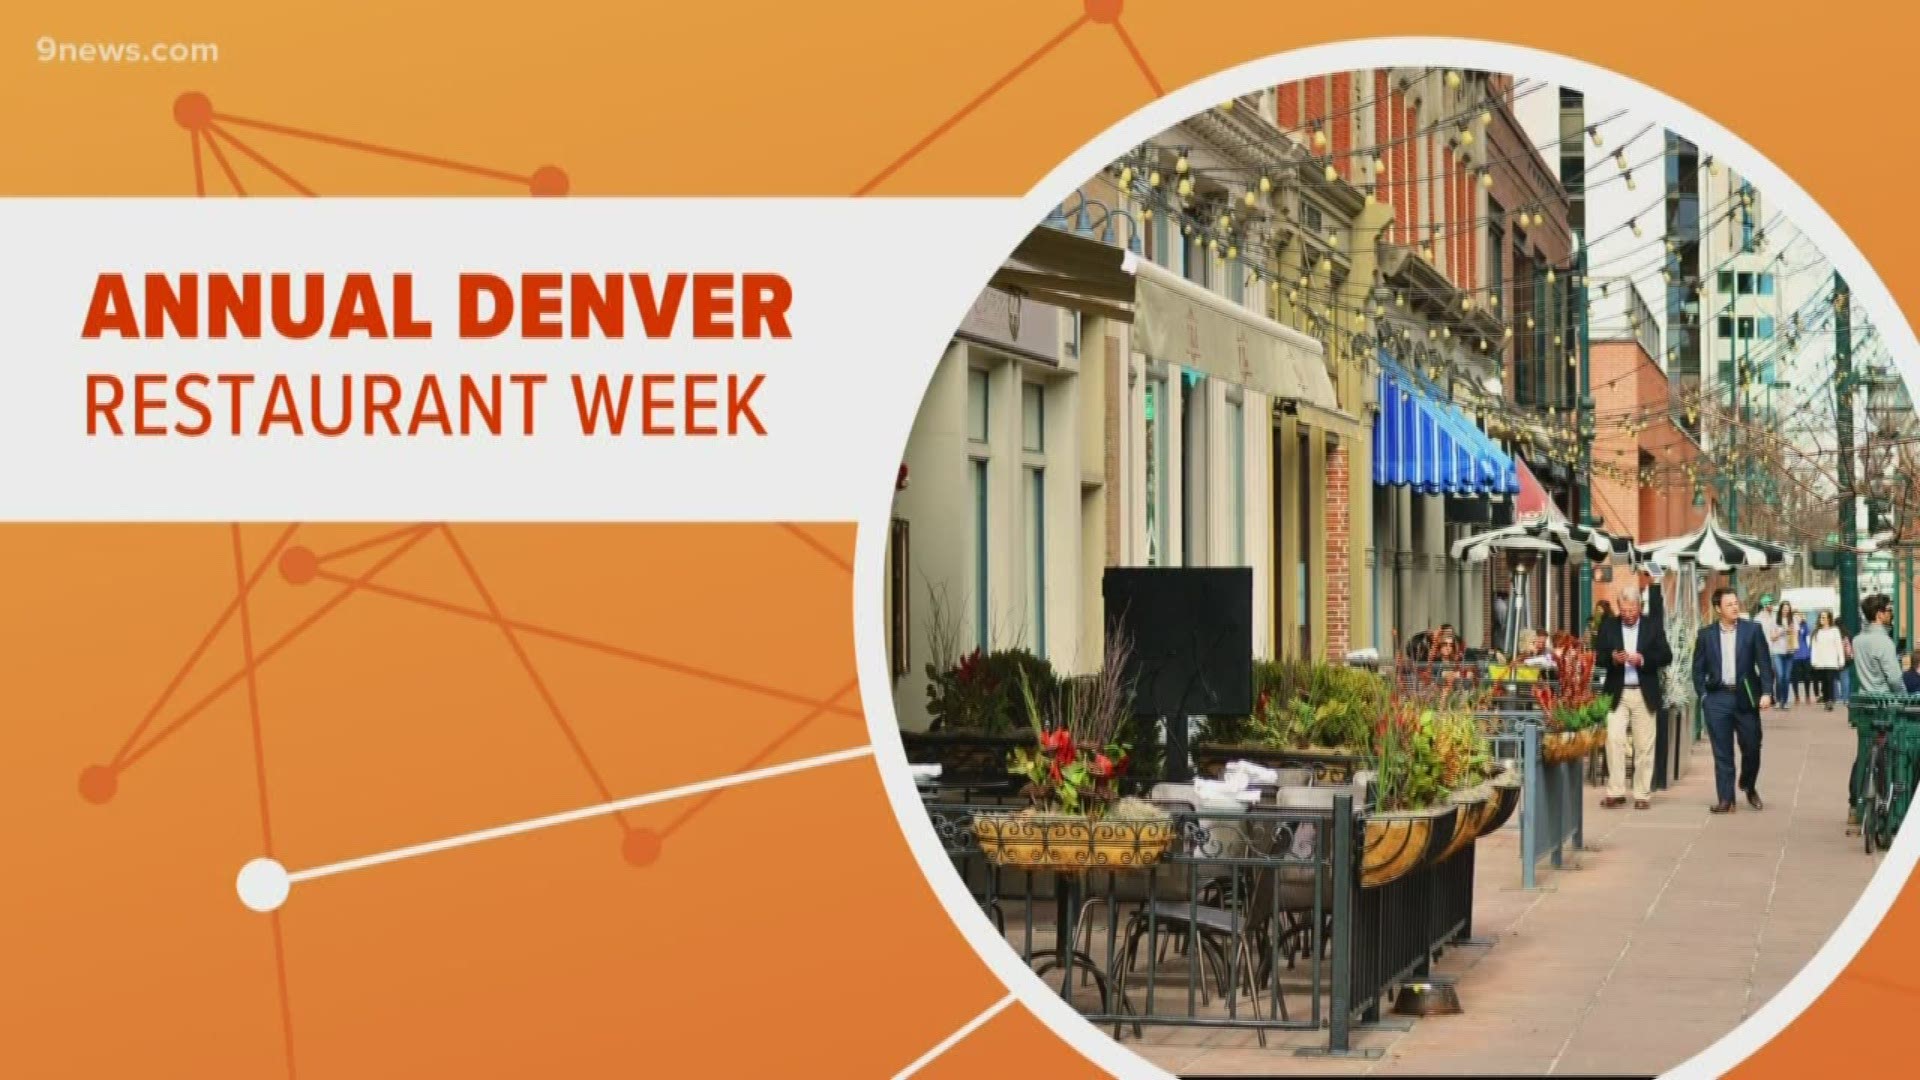 Our resident foodie Kylie Bearse shares her tips for navigating Denver Restaurant Week.